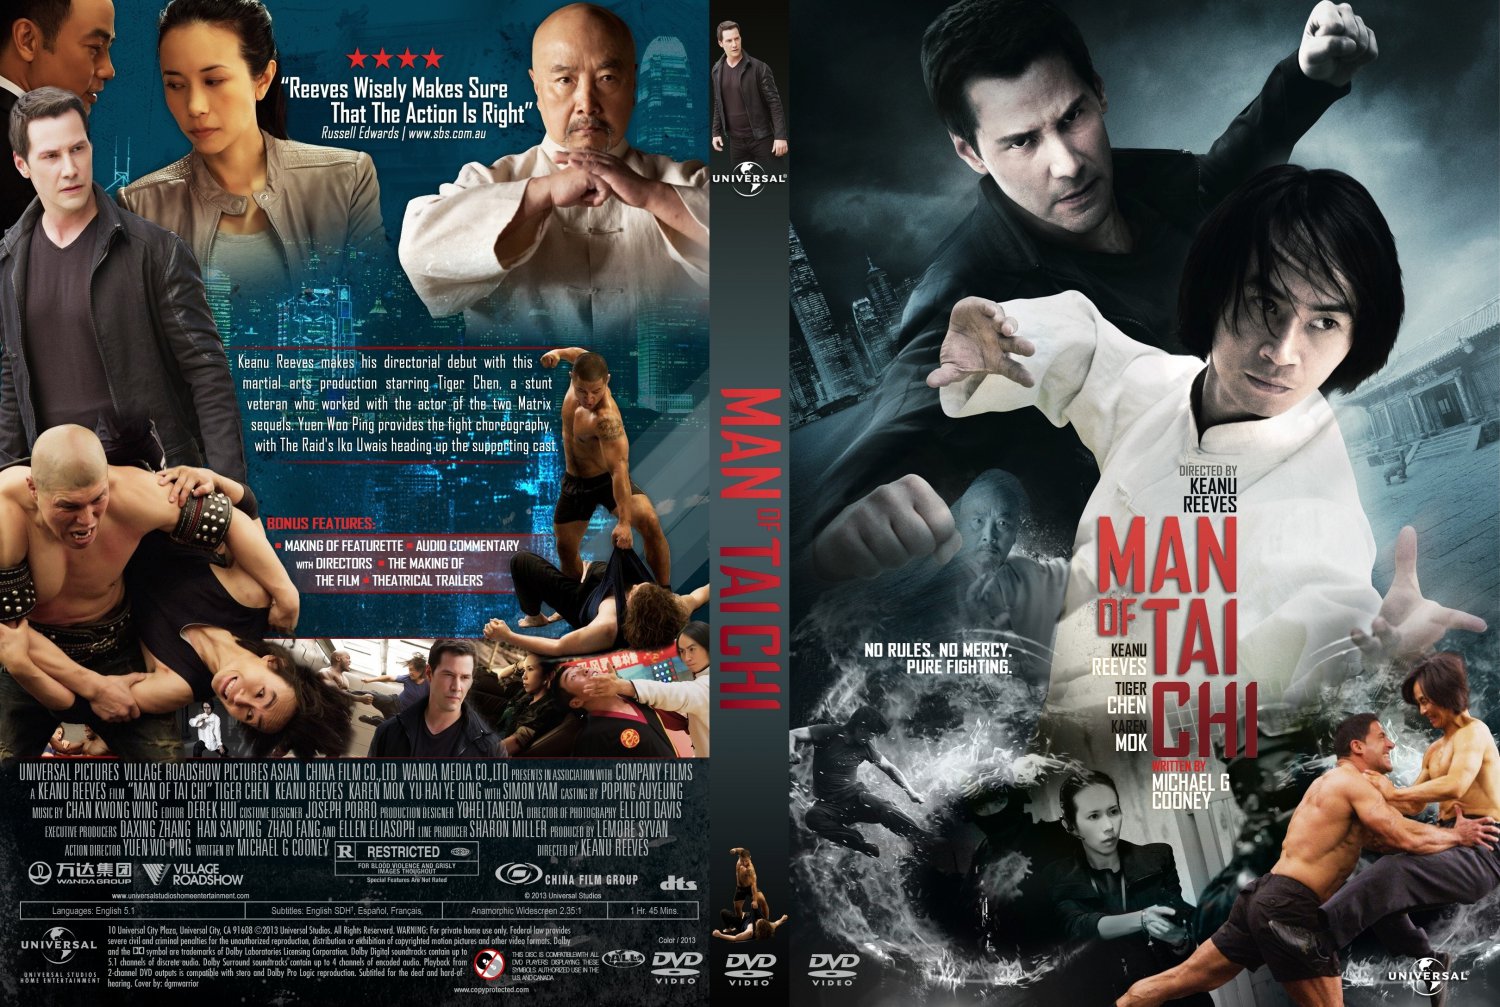 Man Of Tai Chi Wallpapers Movie Hq Man Of Tai Chi Pictures 4k Wallpapers 2019